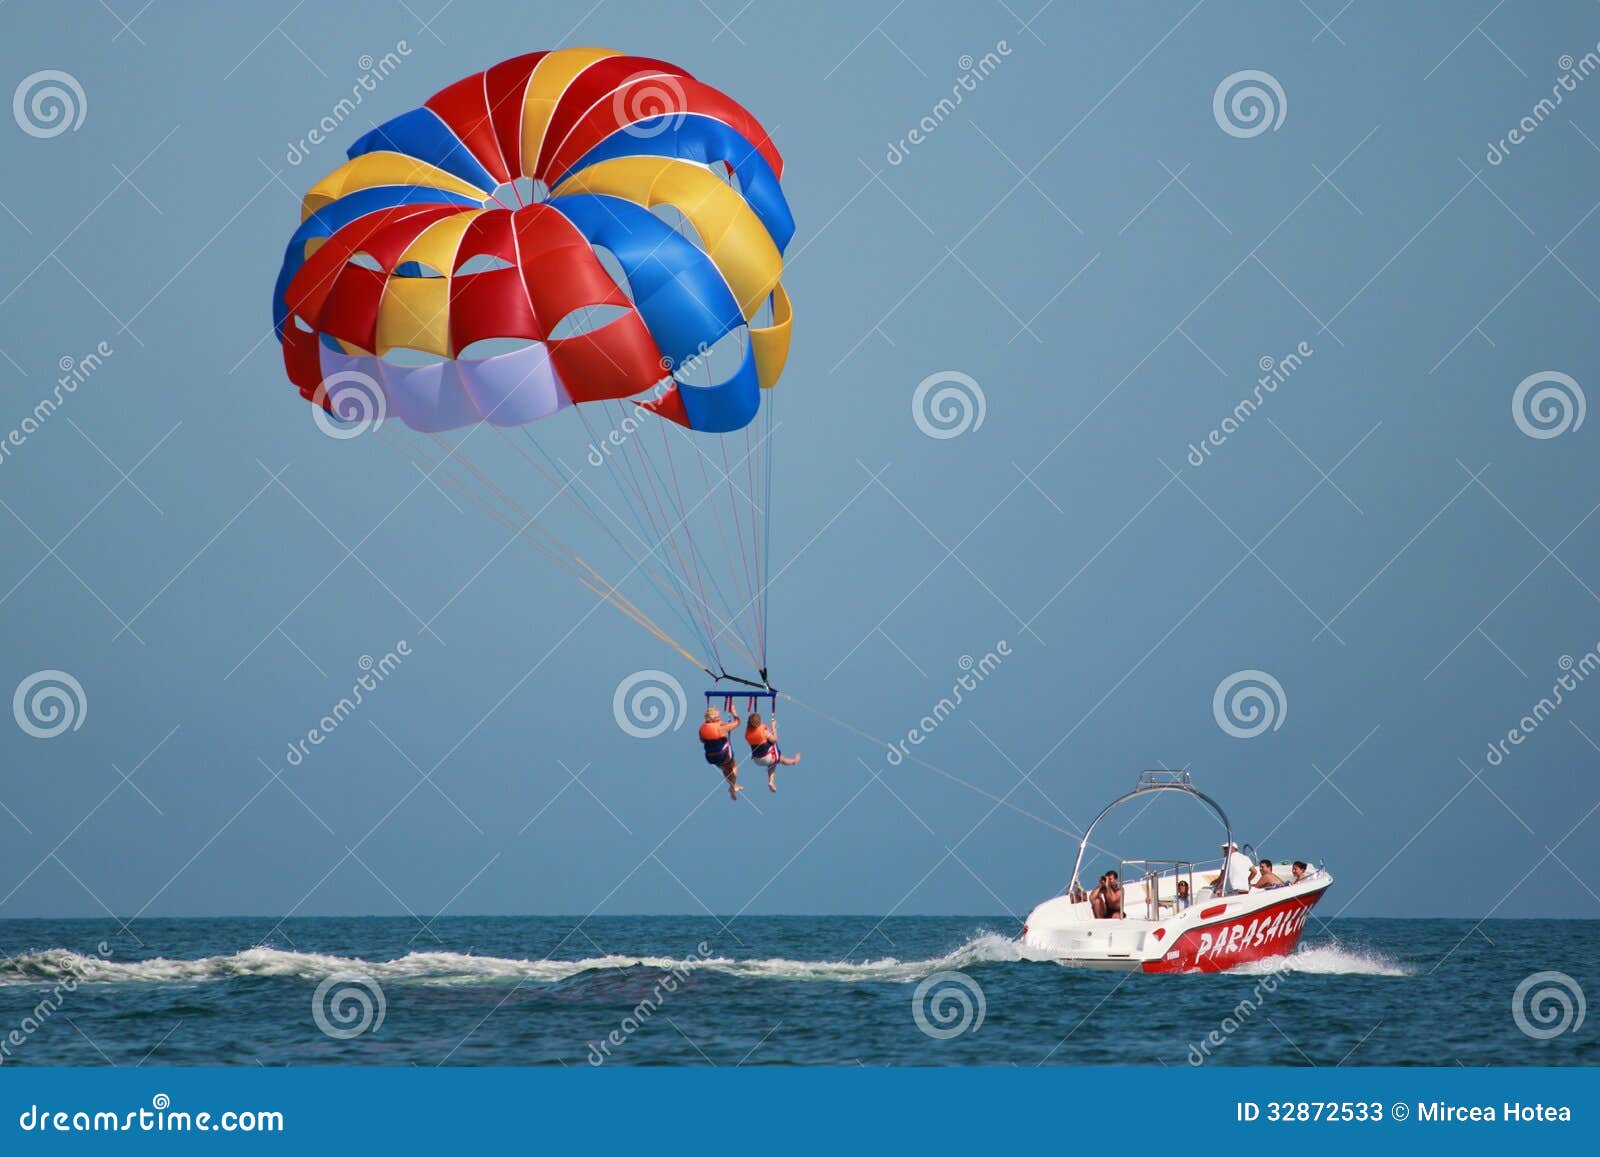 taking off with parasail chute